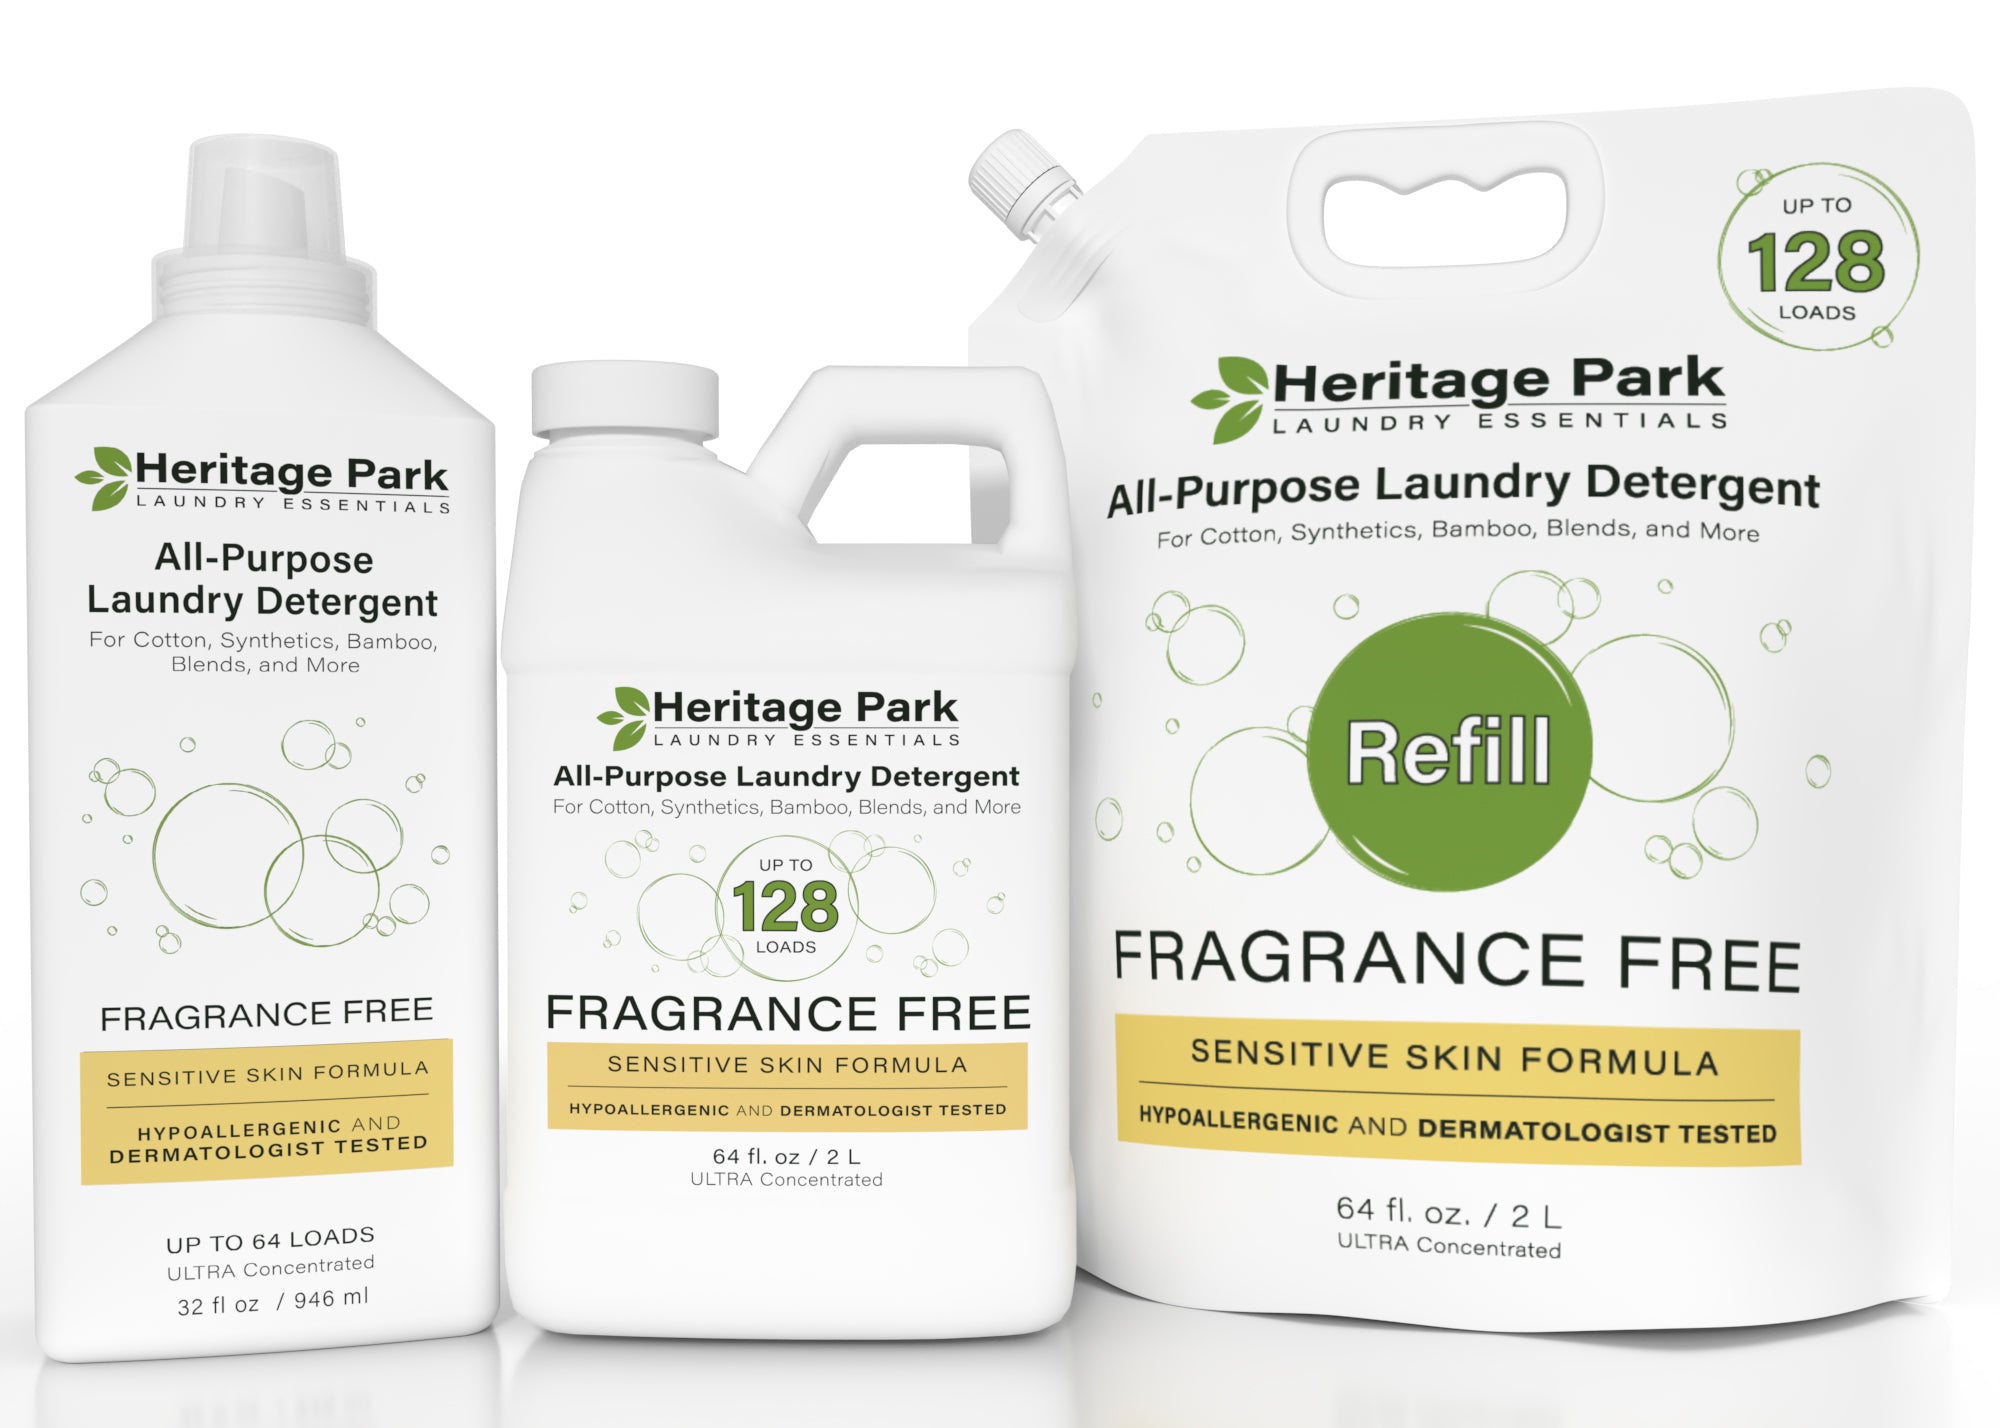 Heritage Park All-Purpose Fragrance Free Laundry Detergents - 32oz, 64oz bottle, and 64oz Refill